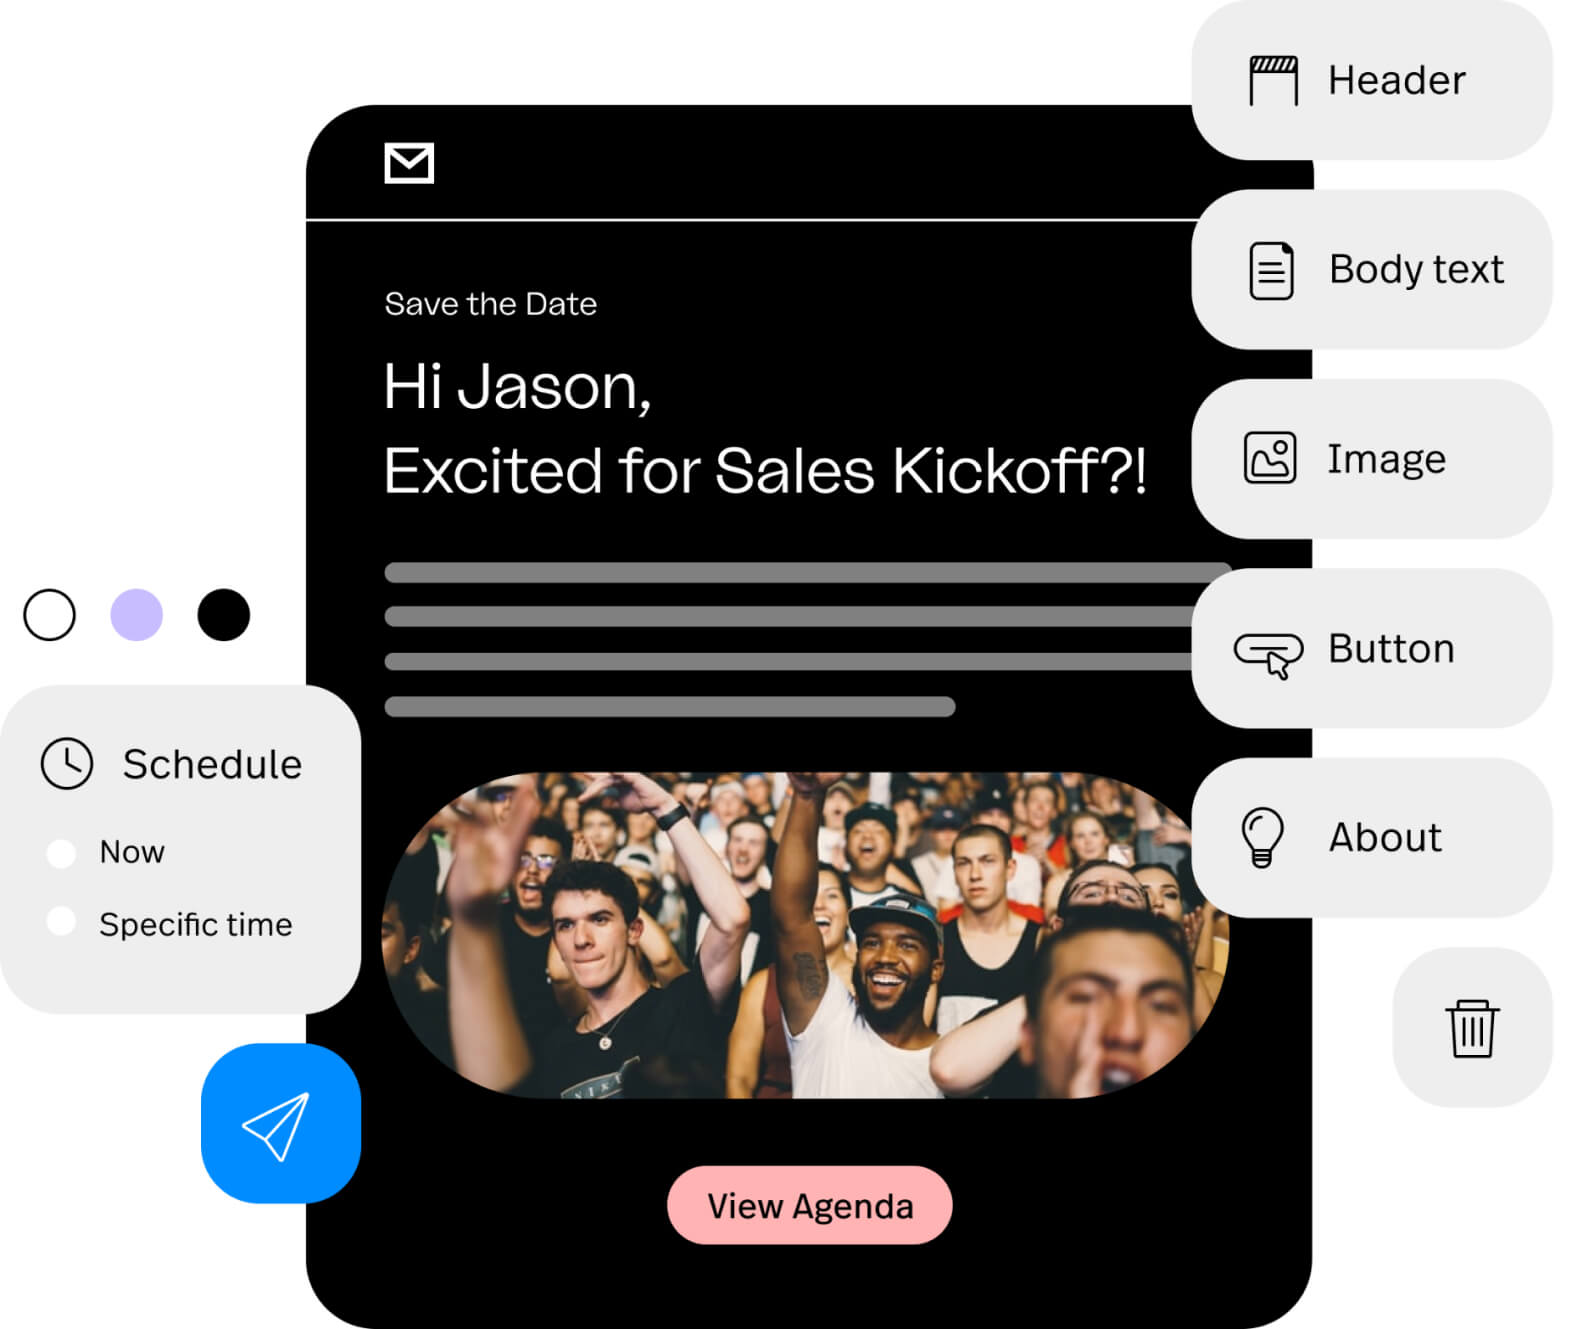 Host a sales kickoff unlike any other